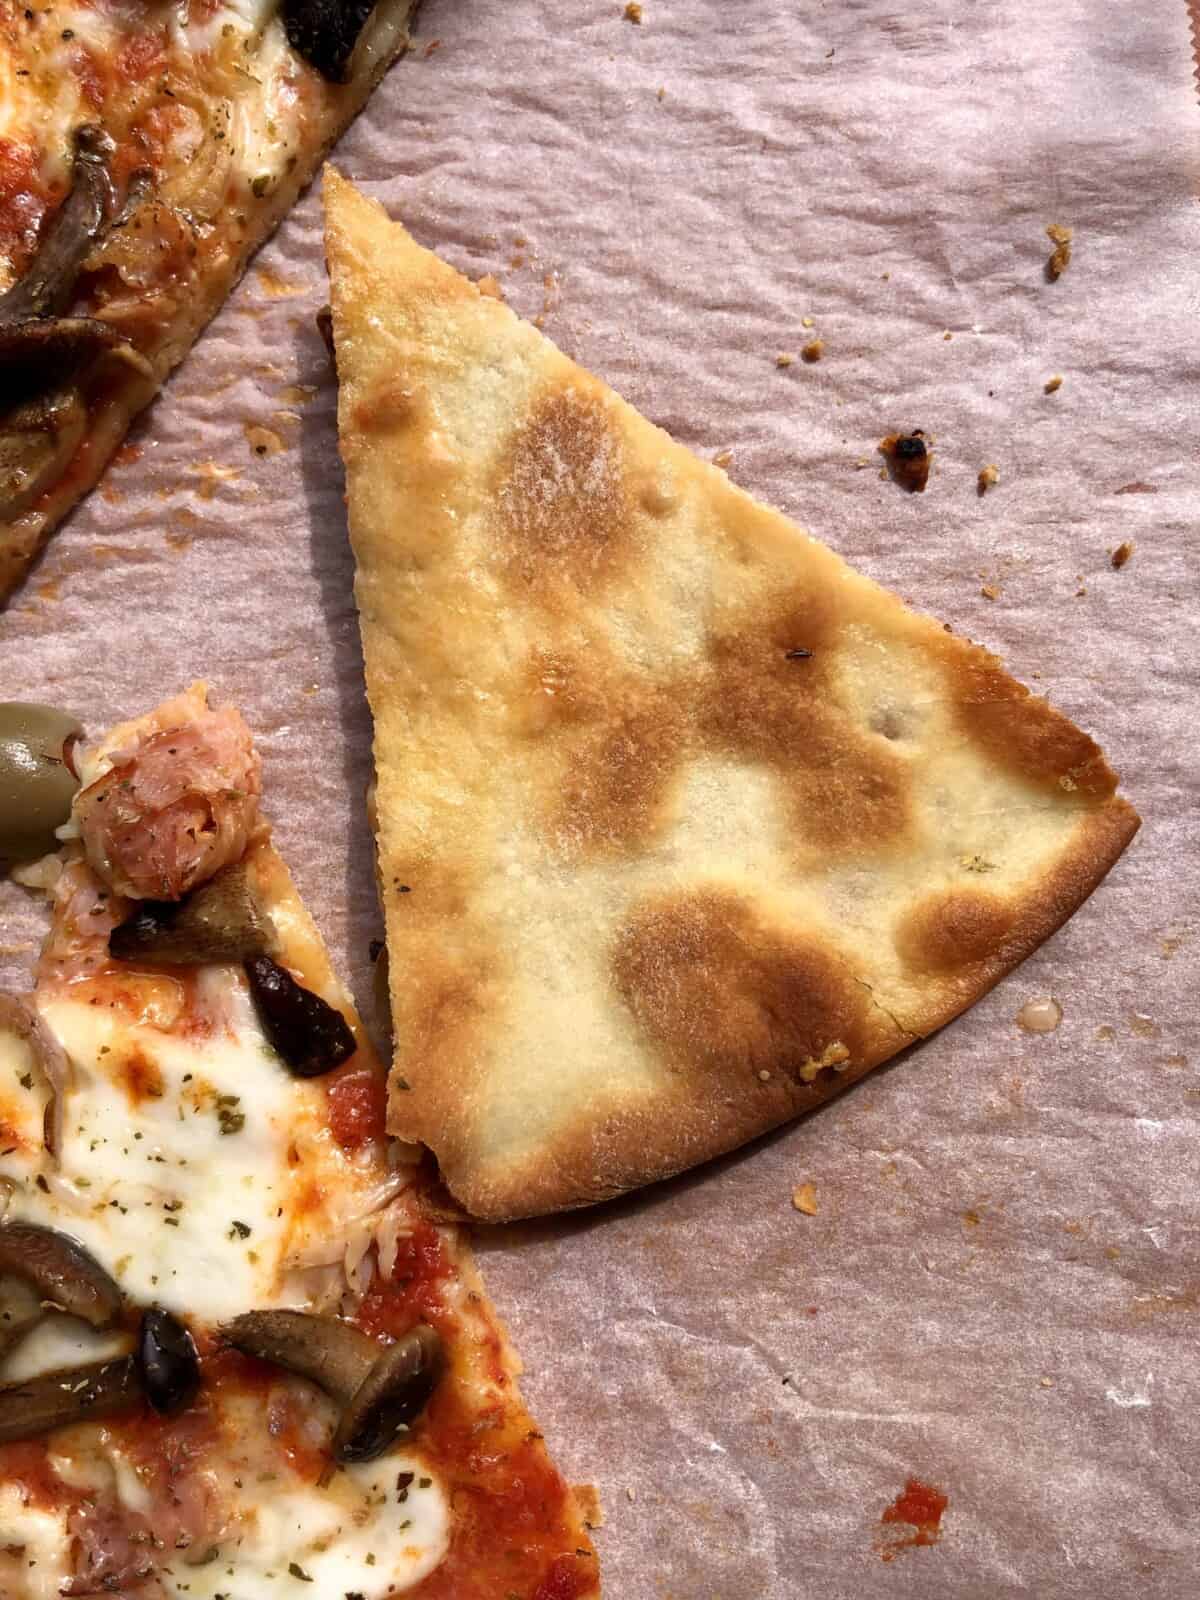 A piece of perfectly baked golden brown crispy thin crust 00 flour pizza turned upside down to reveal the bottom crust and it's beautiful color